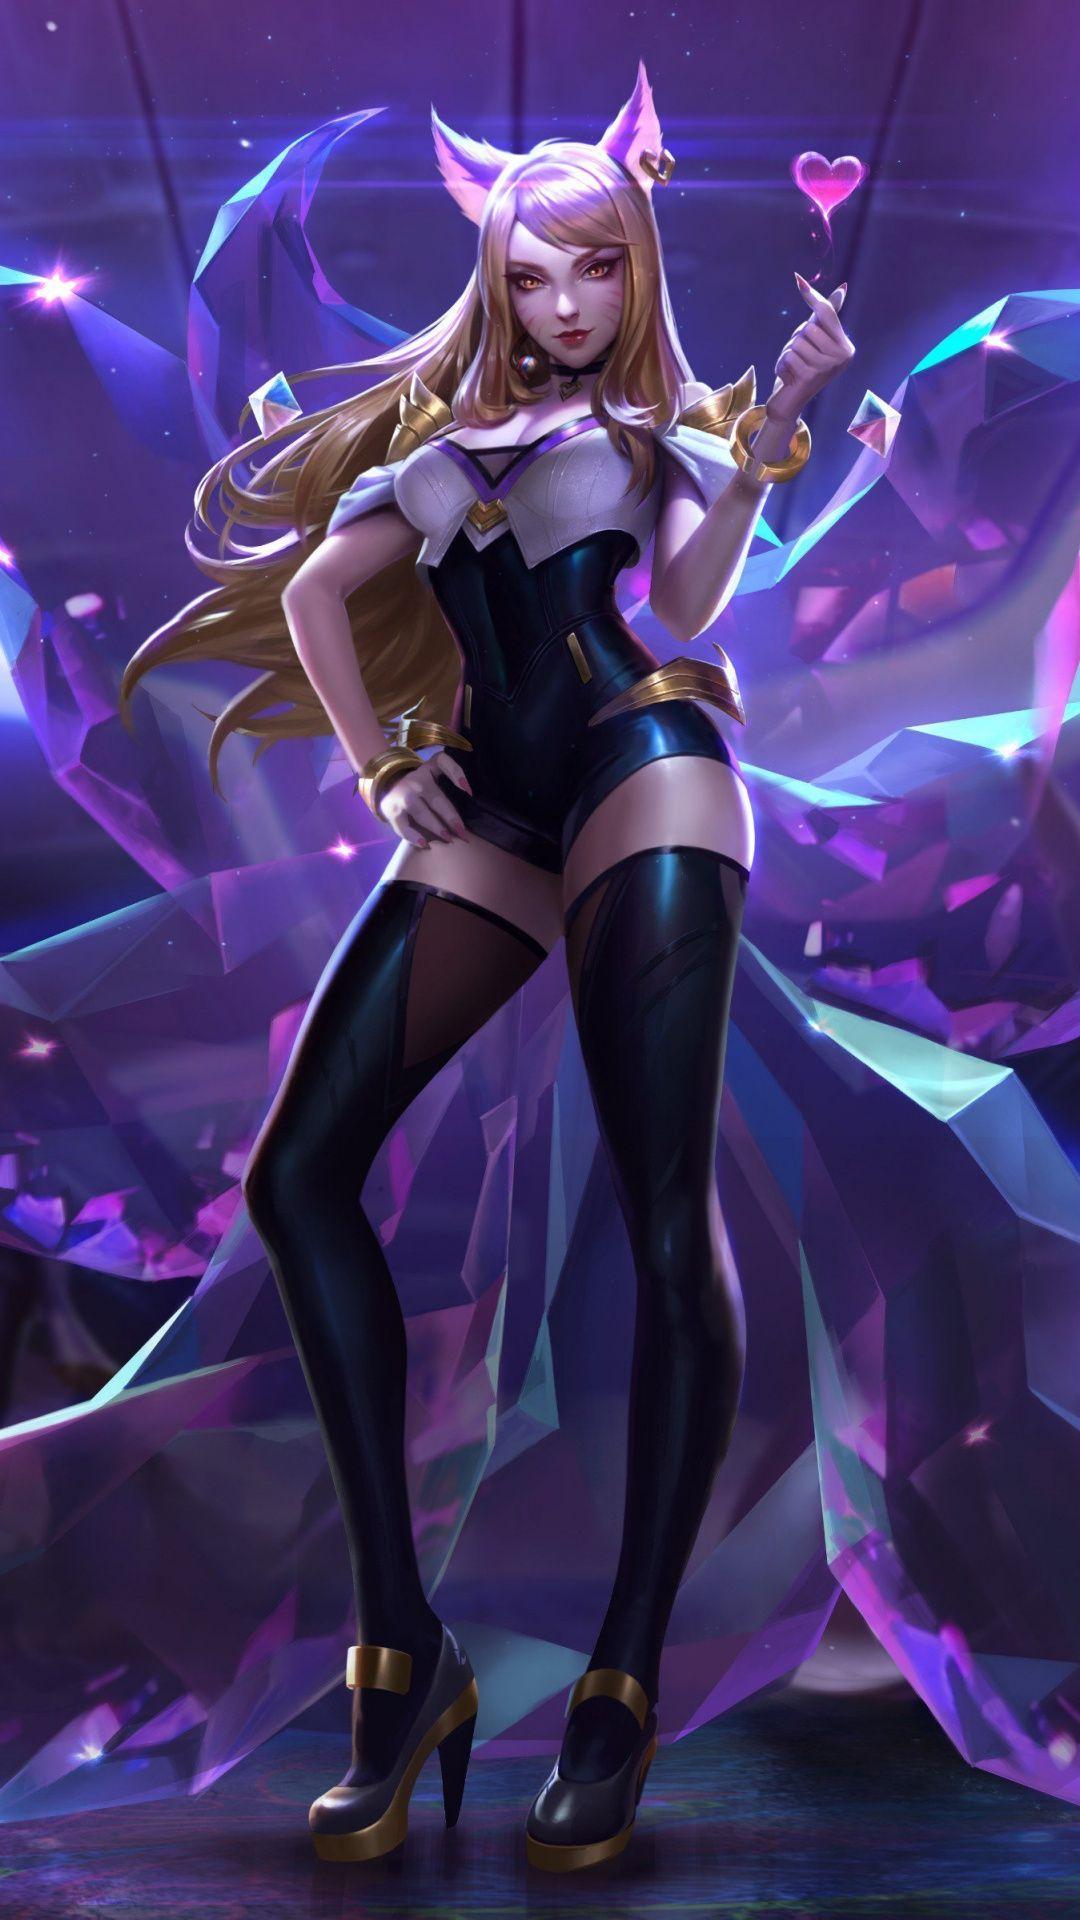 Ahri Kda Wild Rift Wallpaper Once You See The Icons In Your League Of Legends Account You Can